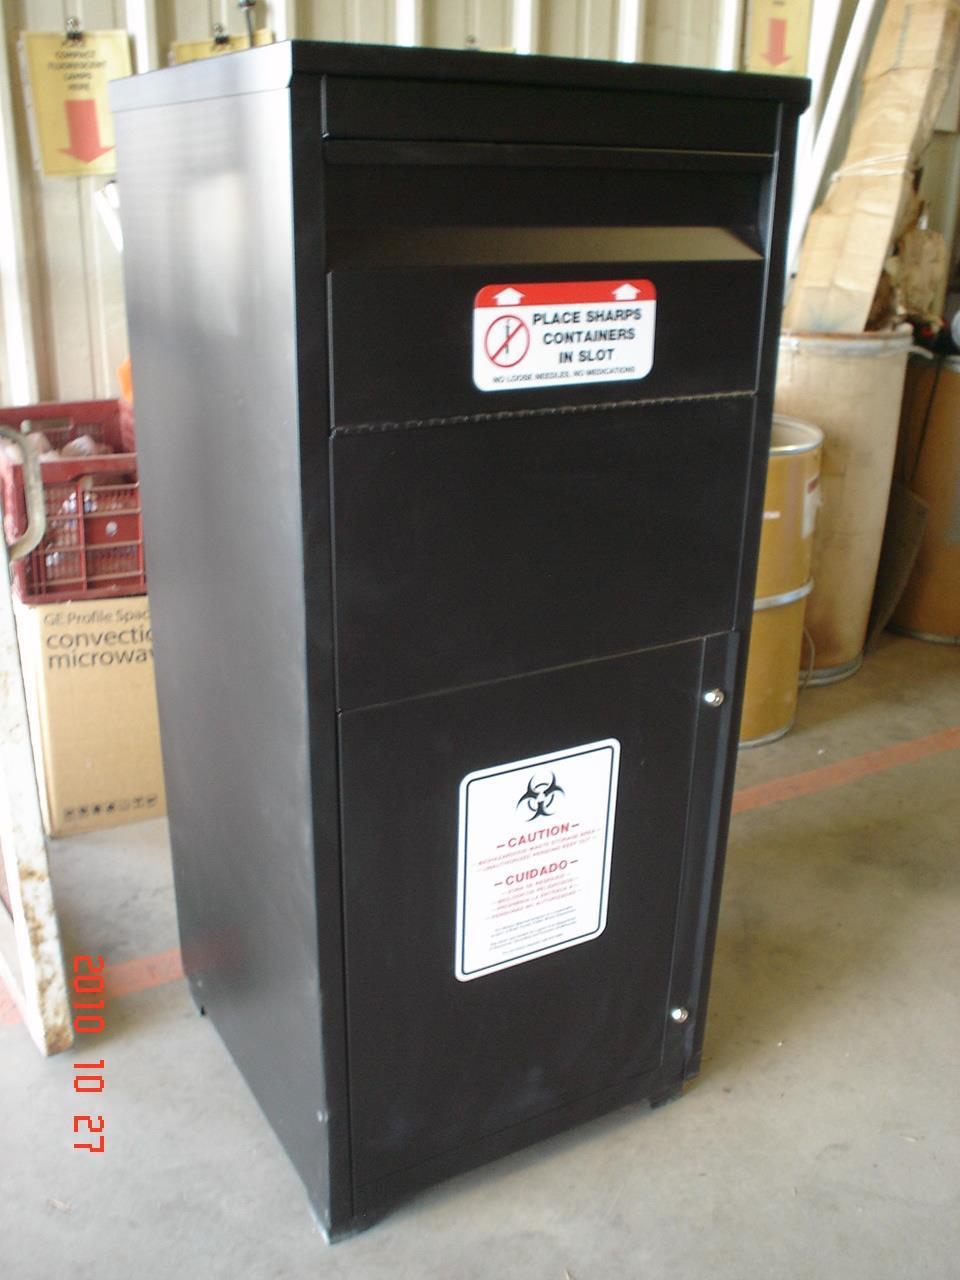 Page -9- MEDICAL WASTE SERVICE PROVIDERS (Appendix D) DISPOSAL OF HOME-GENERATED SHARPS SAFE SHARPS DISPOSAL KIOSK Sharps disposal kiosks became available in Butte County through the grant from